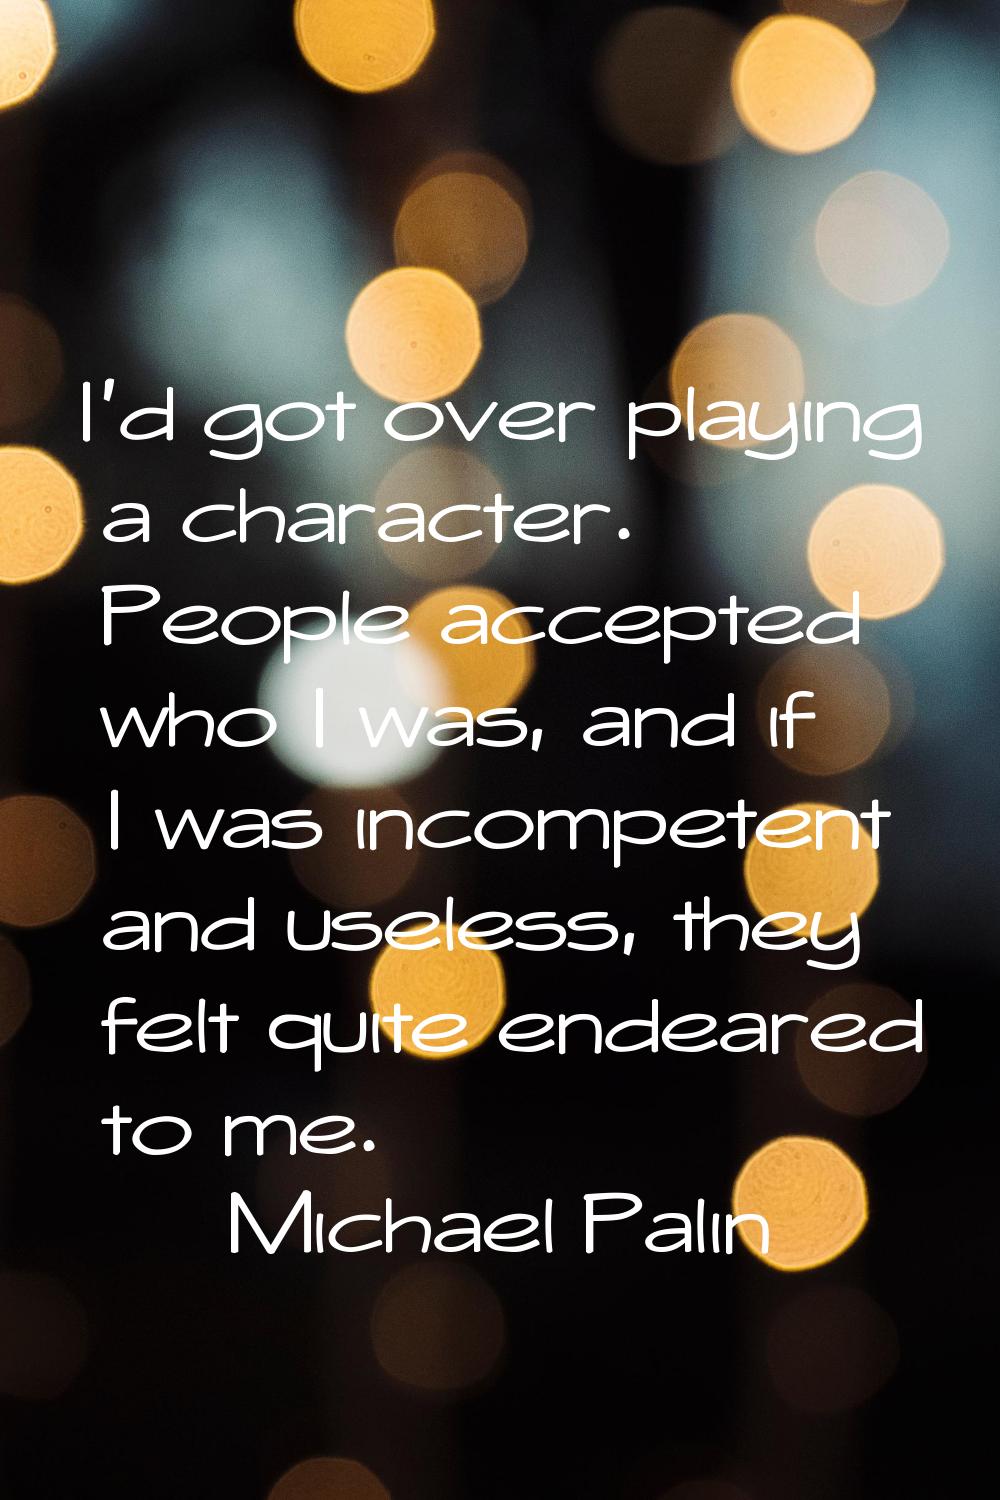 I'd got over playing a character. People accepted who I was, and if I was incompetent and useless, 